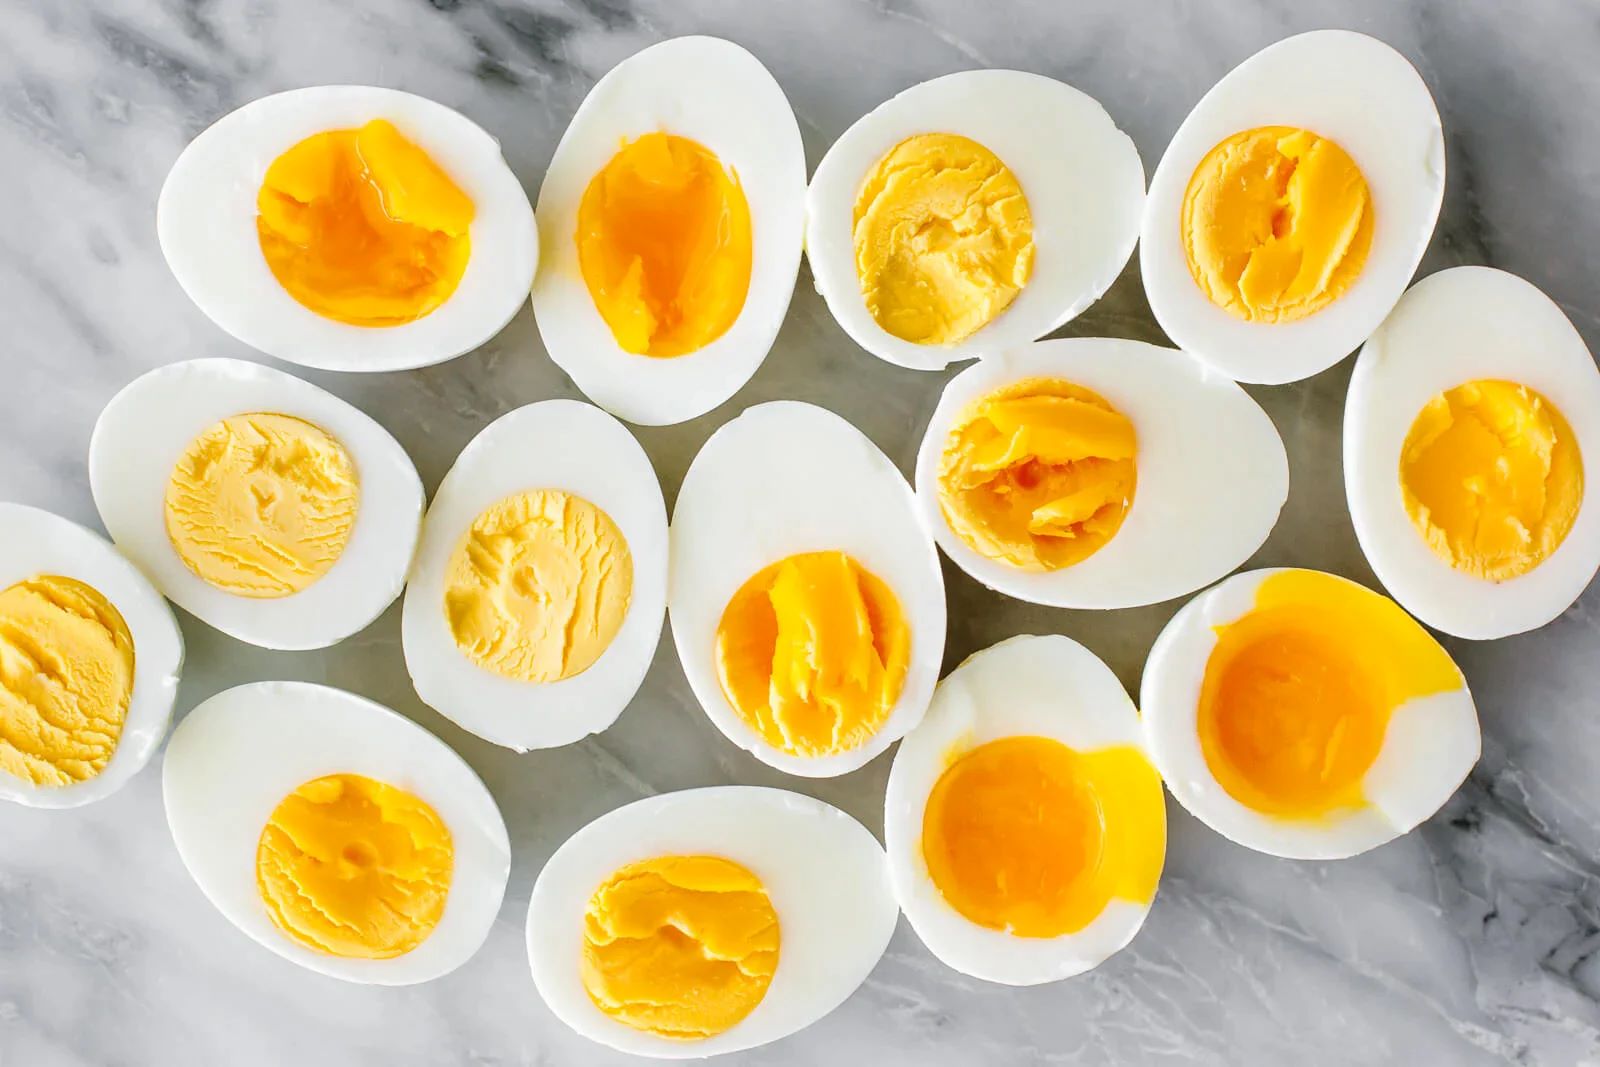 How To Store Boiled Eggs Without Refrigeration